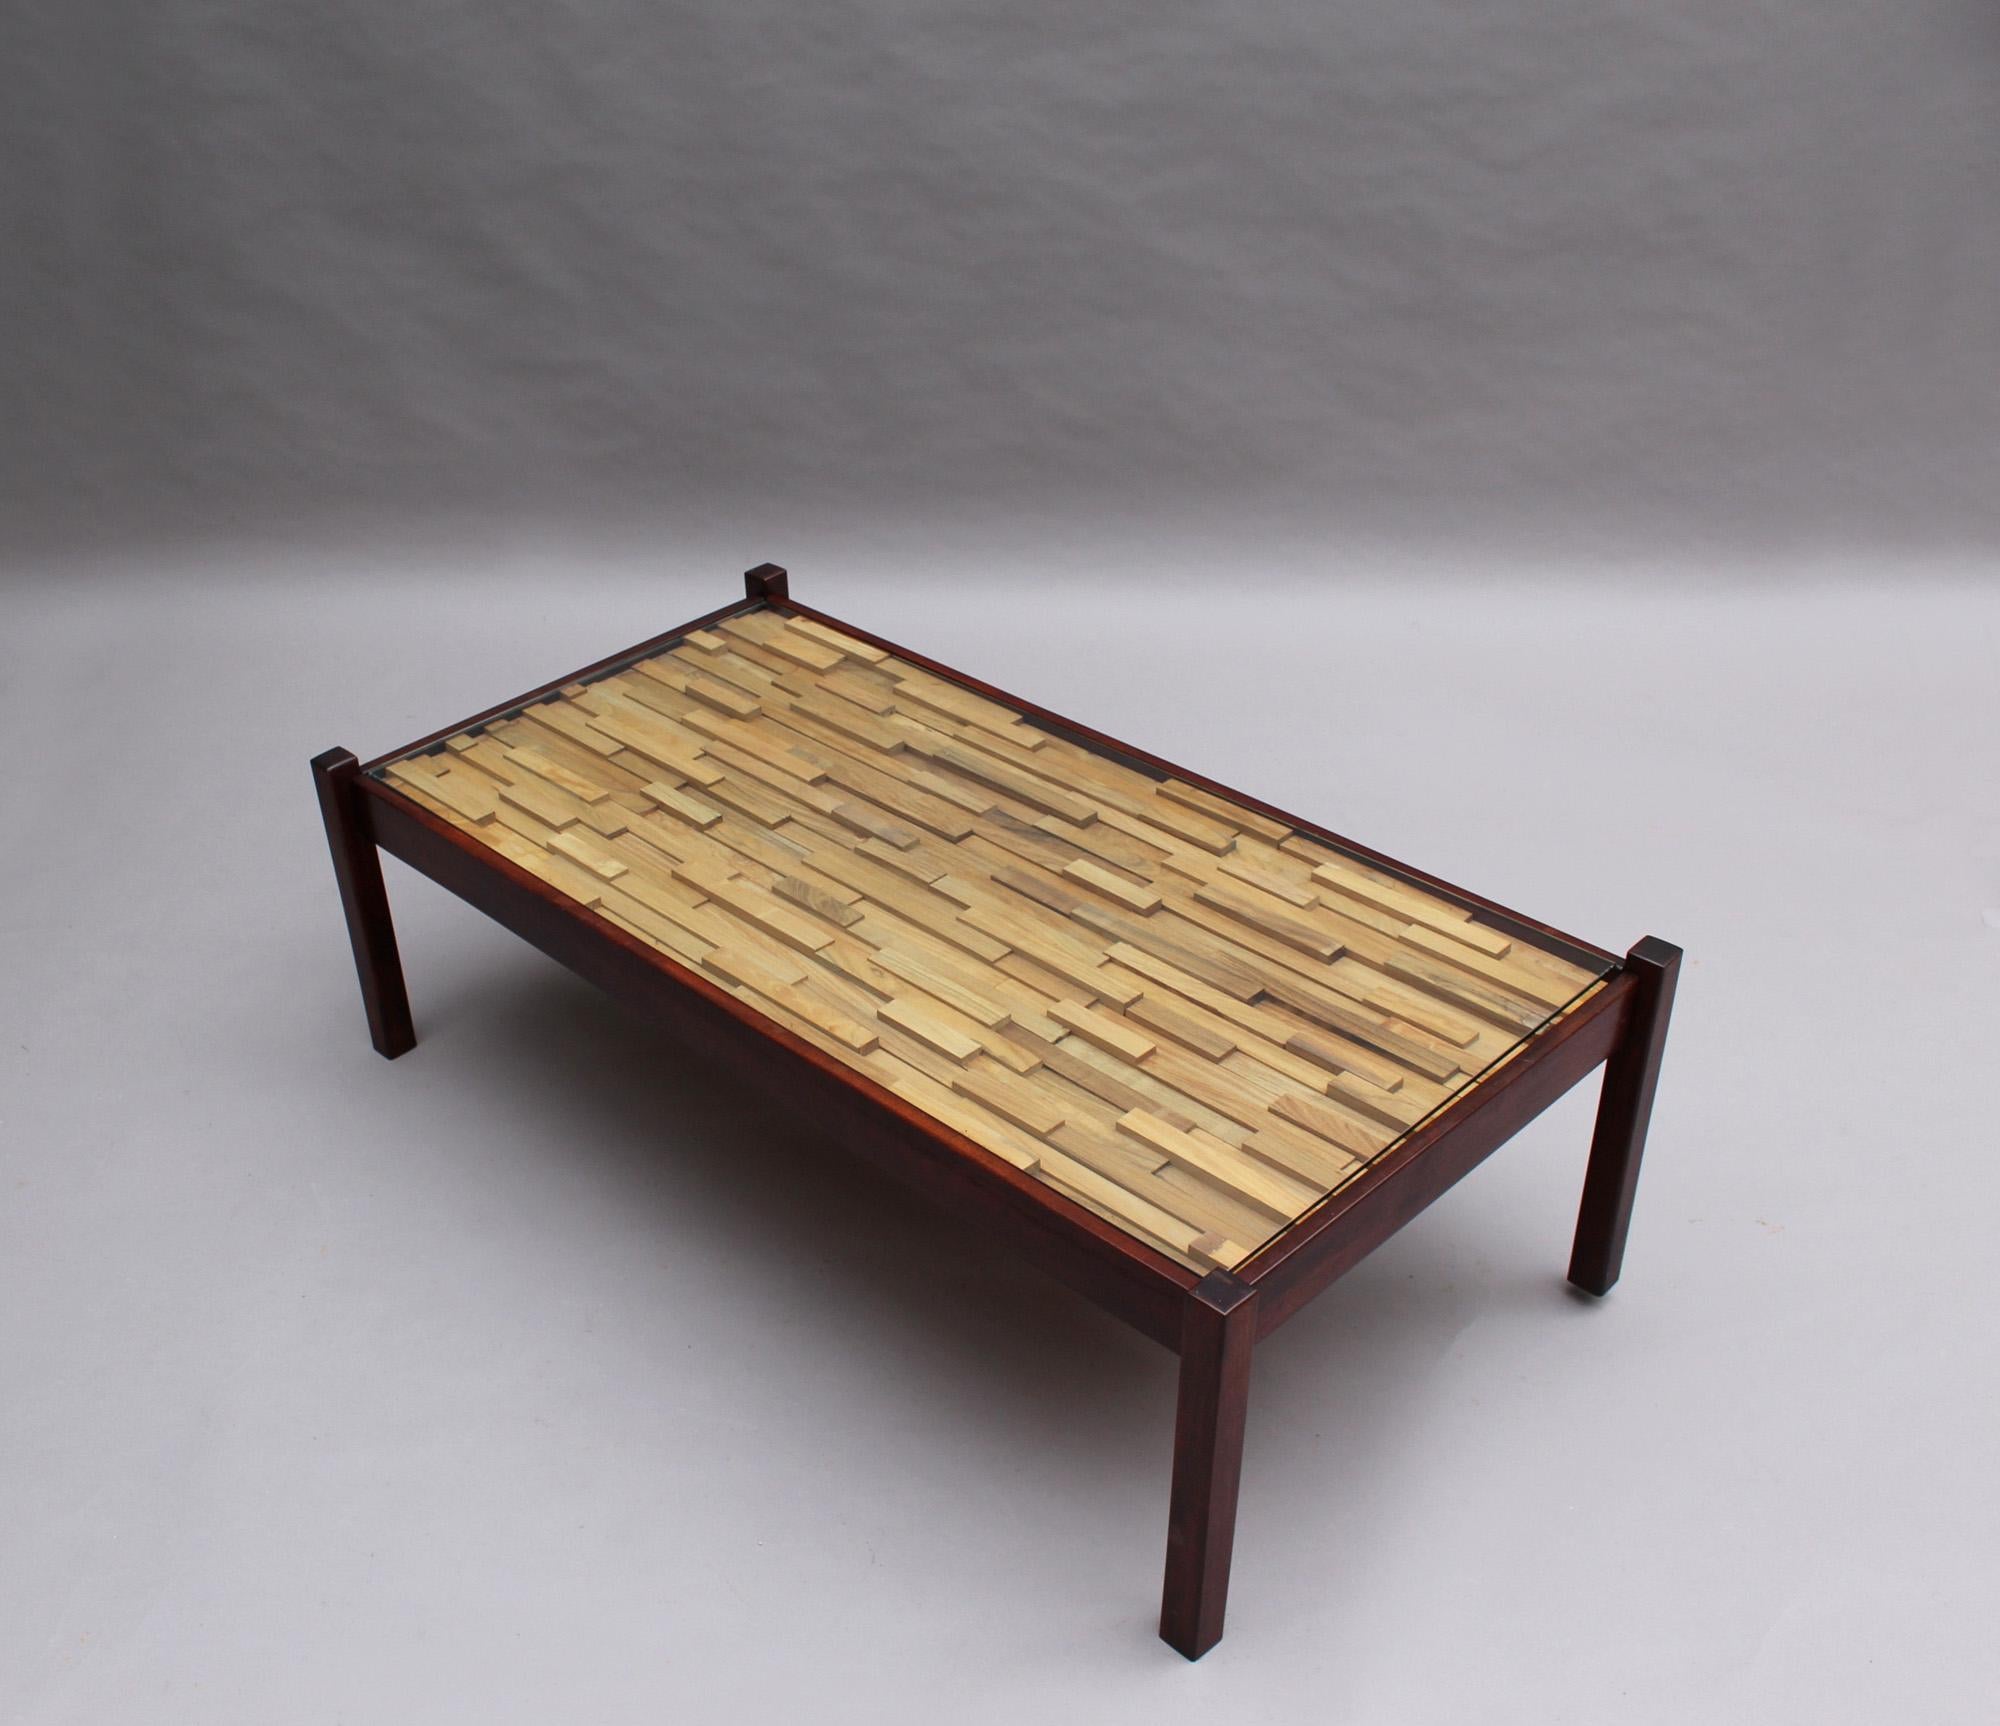 A mid-century Brutalist style coffee table with a staggered wooden block relief design, protected with a glass top.